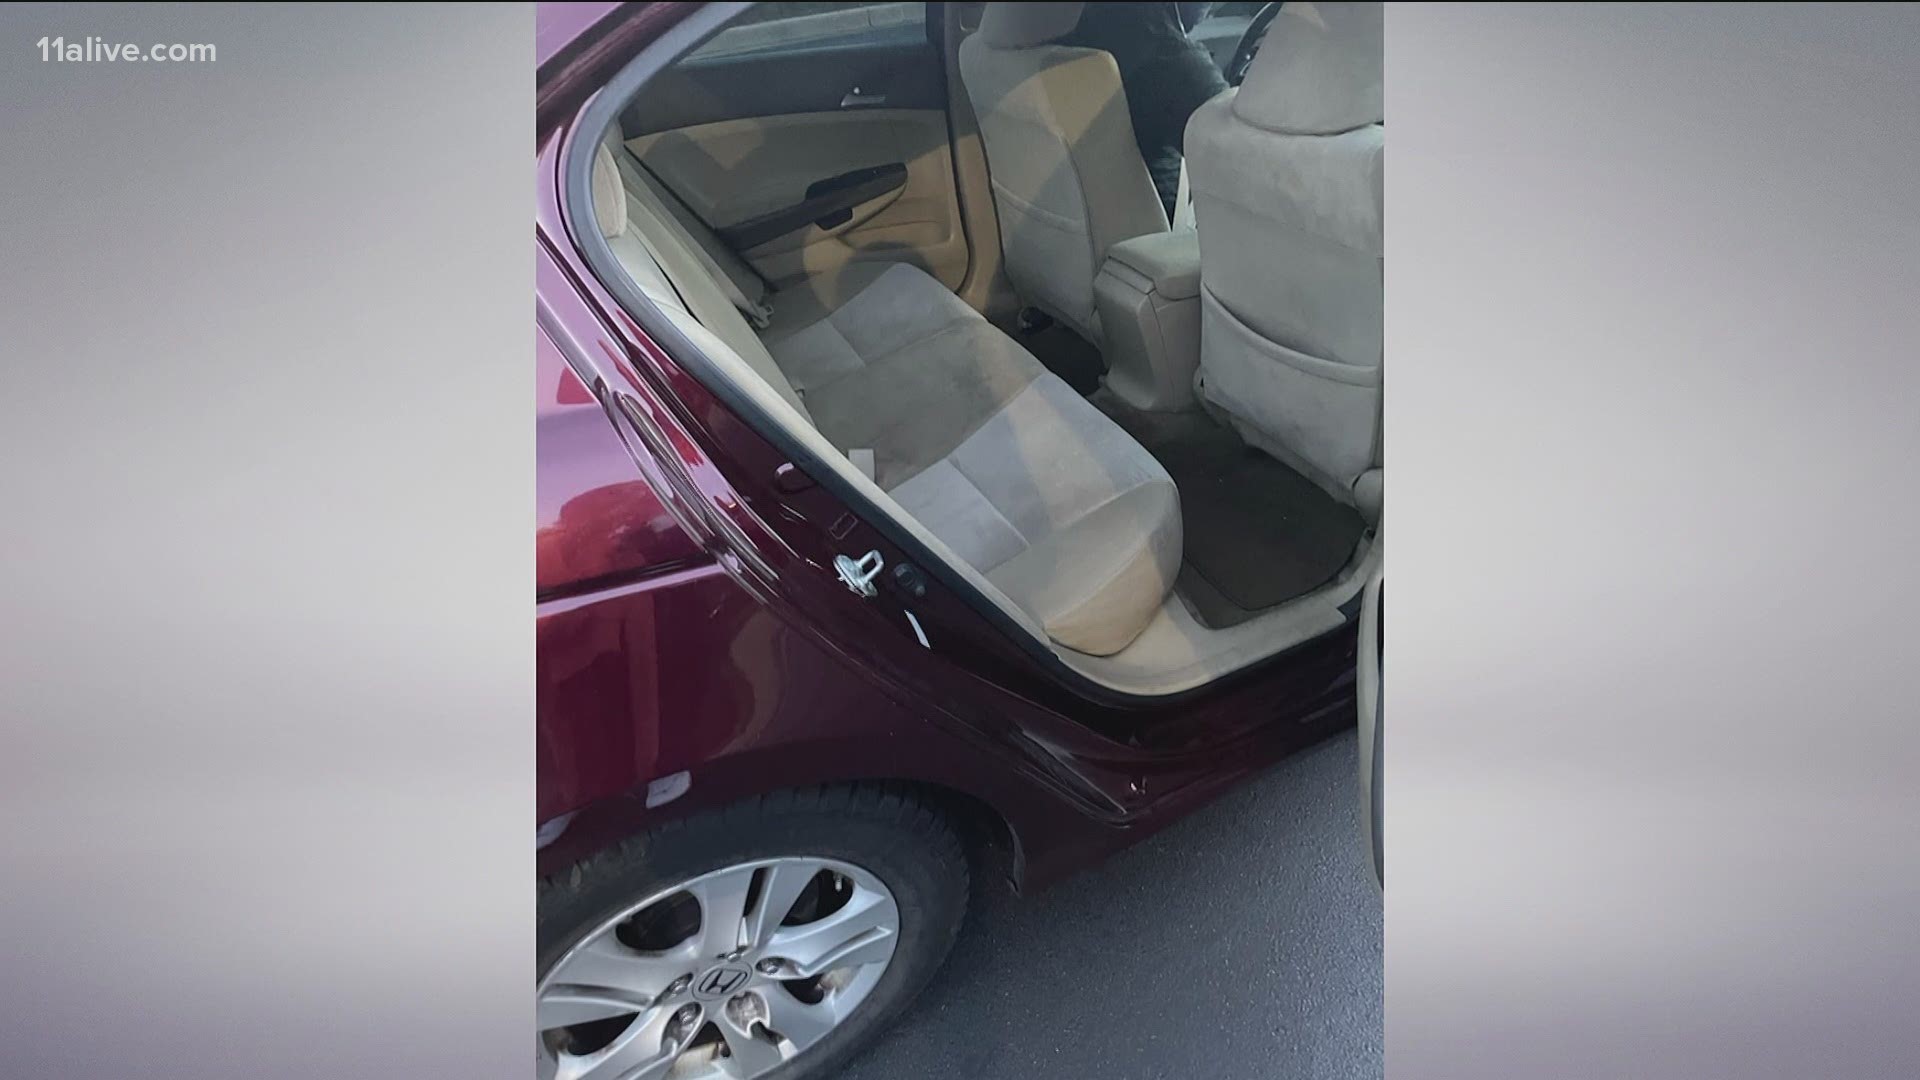 An Atlanta woman said she had to throw herself out of her Lyft because she thought she might be in danger.